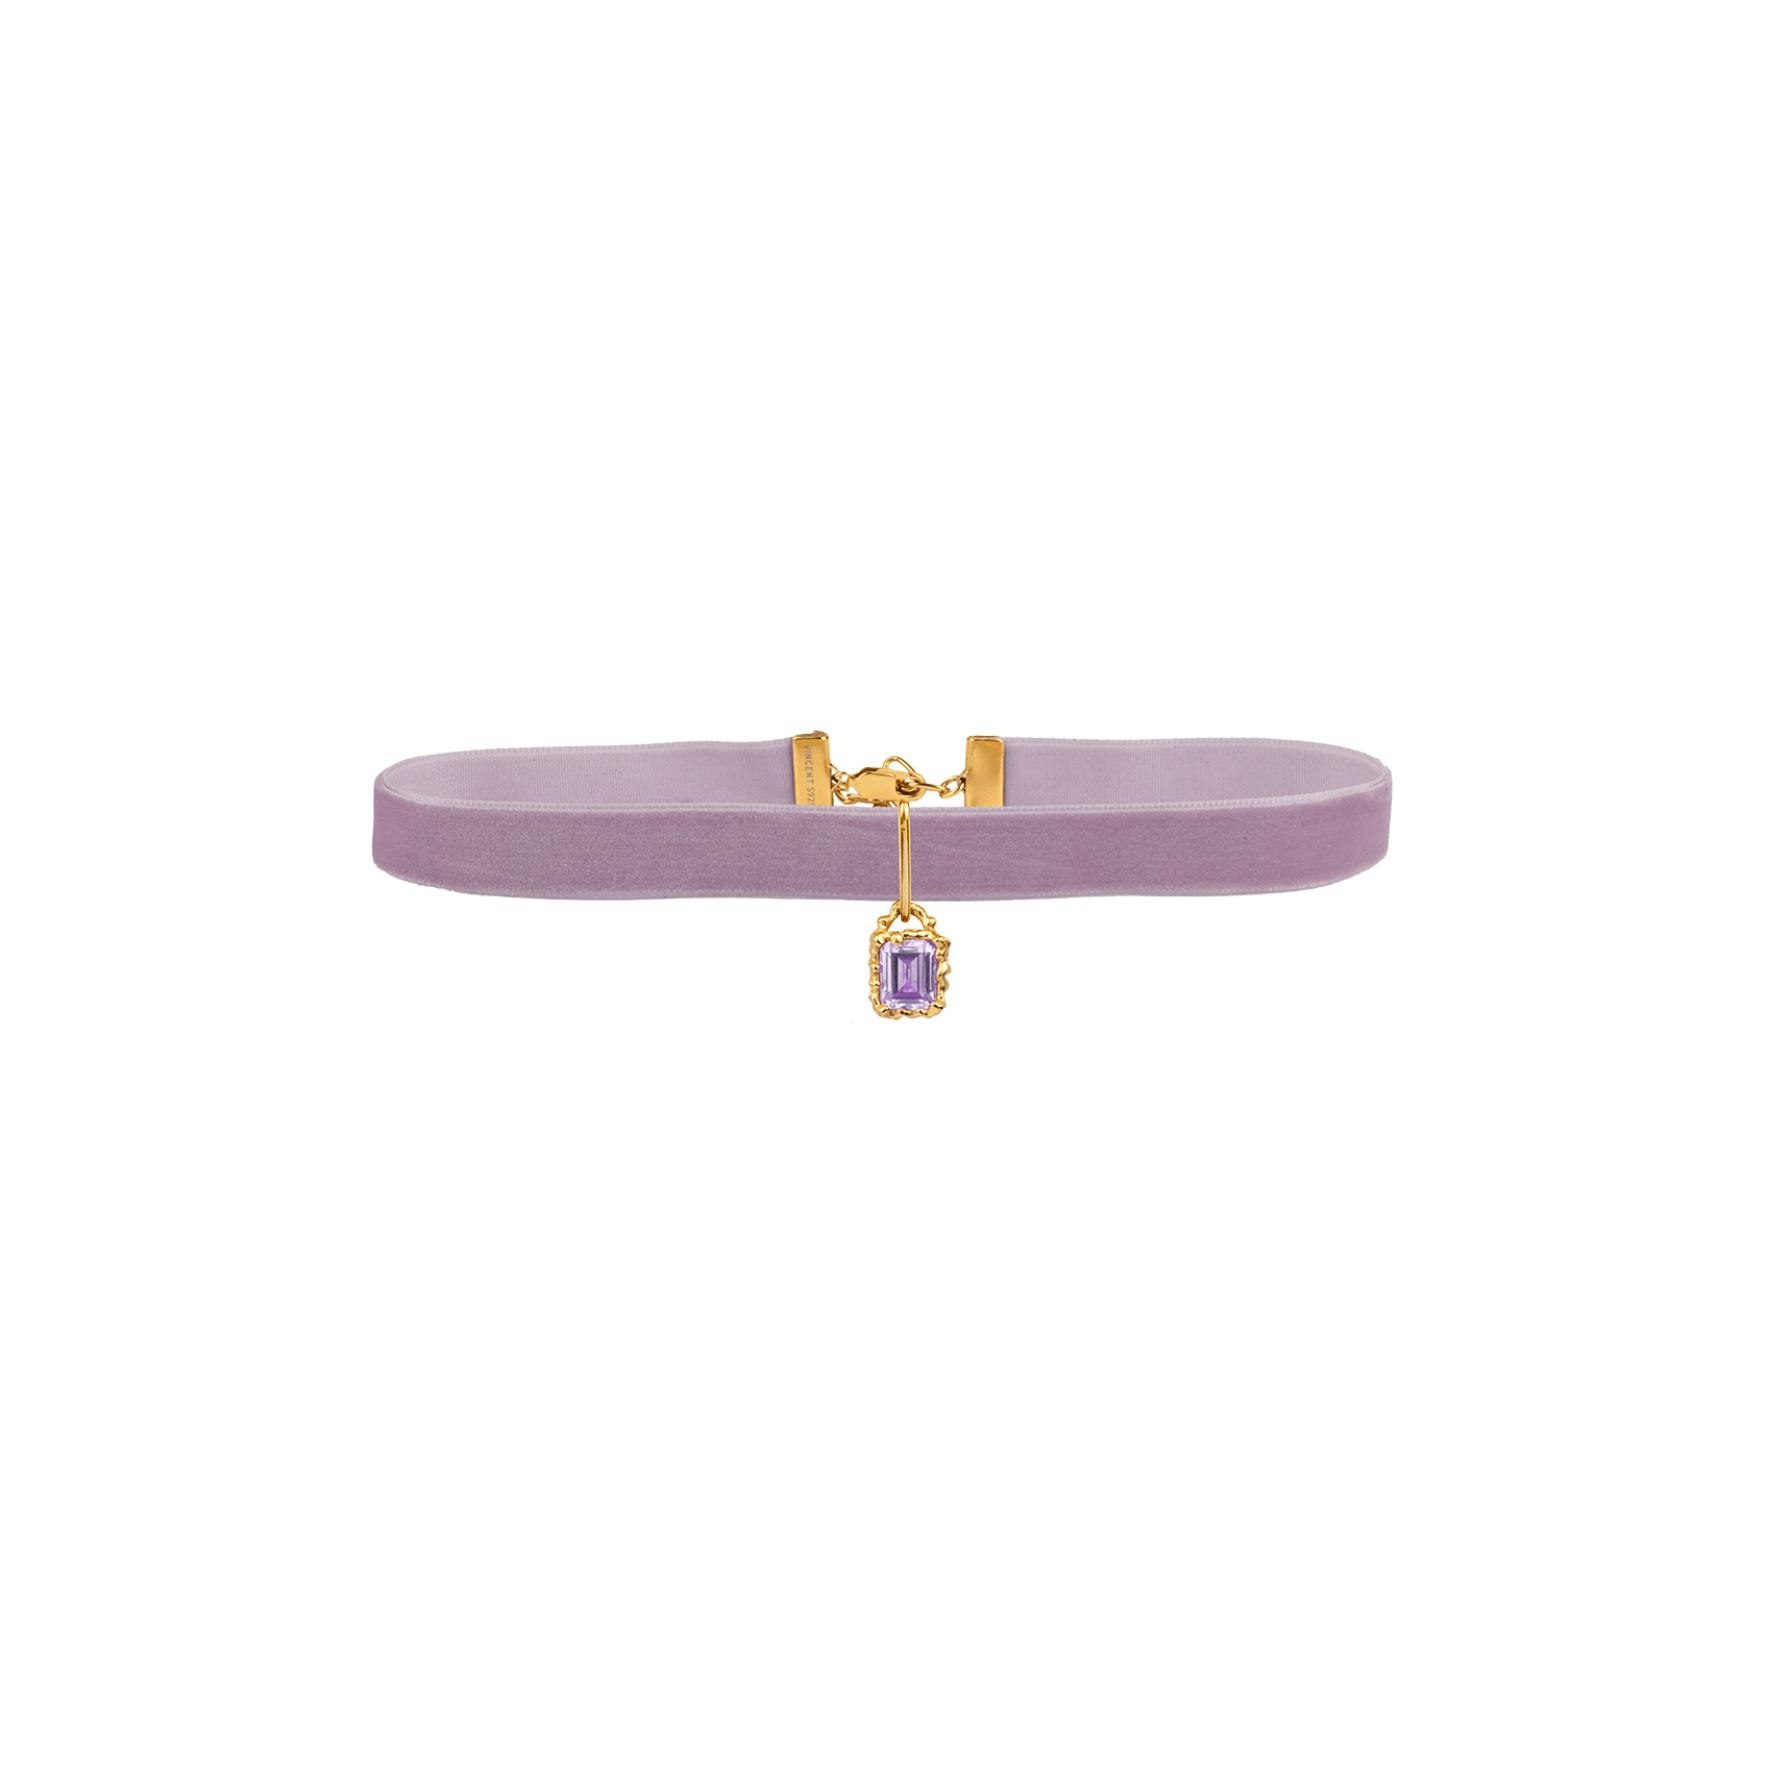 String Of Prosperity Choker Necklace Pink Amethyst from House Of Vincent in Goldplated Silver Sterling 925